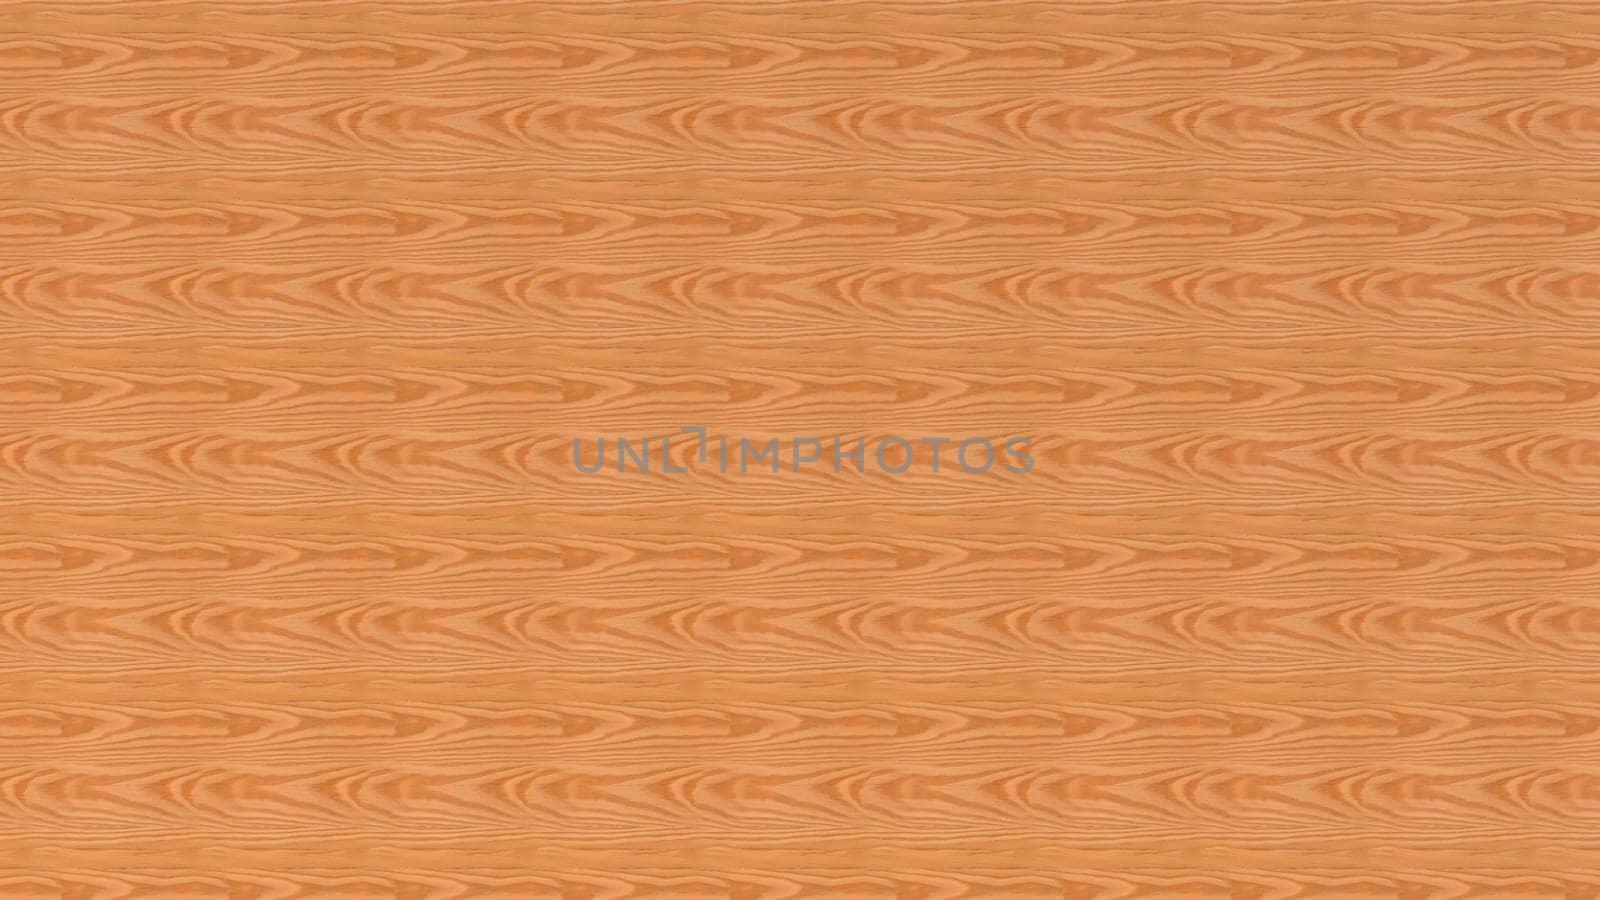 Light brown scratched wooden texture background view